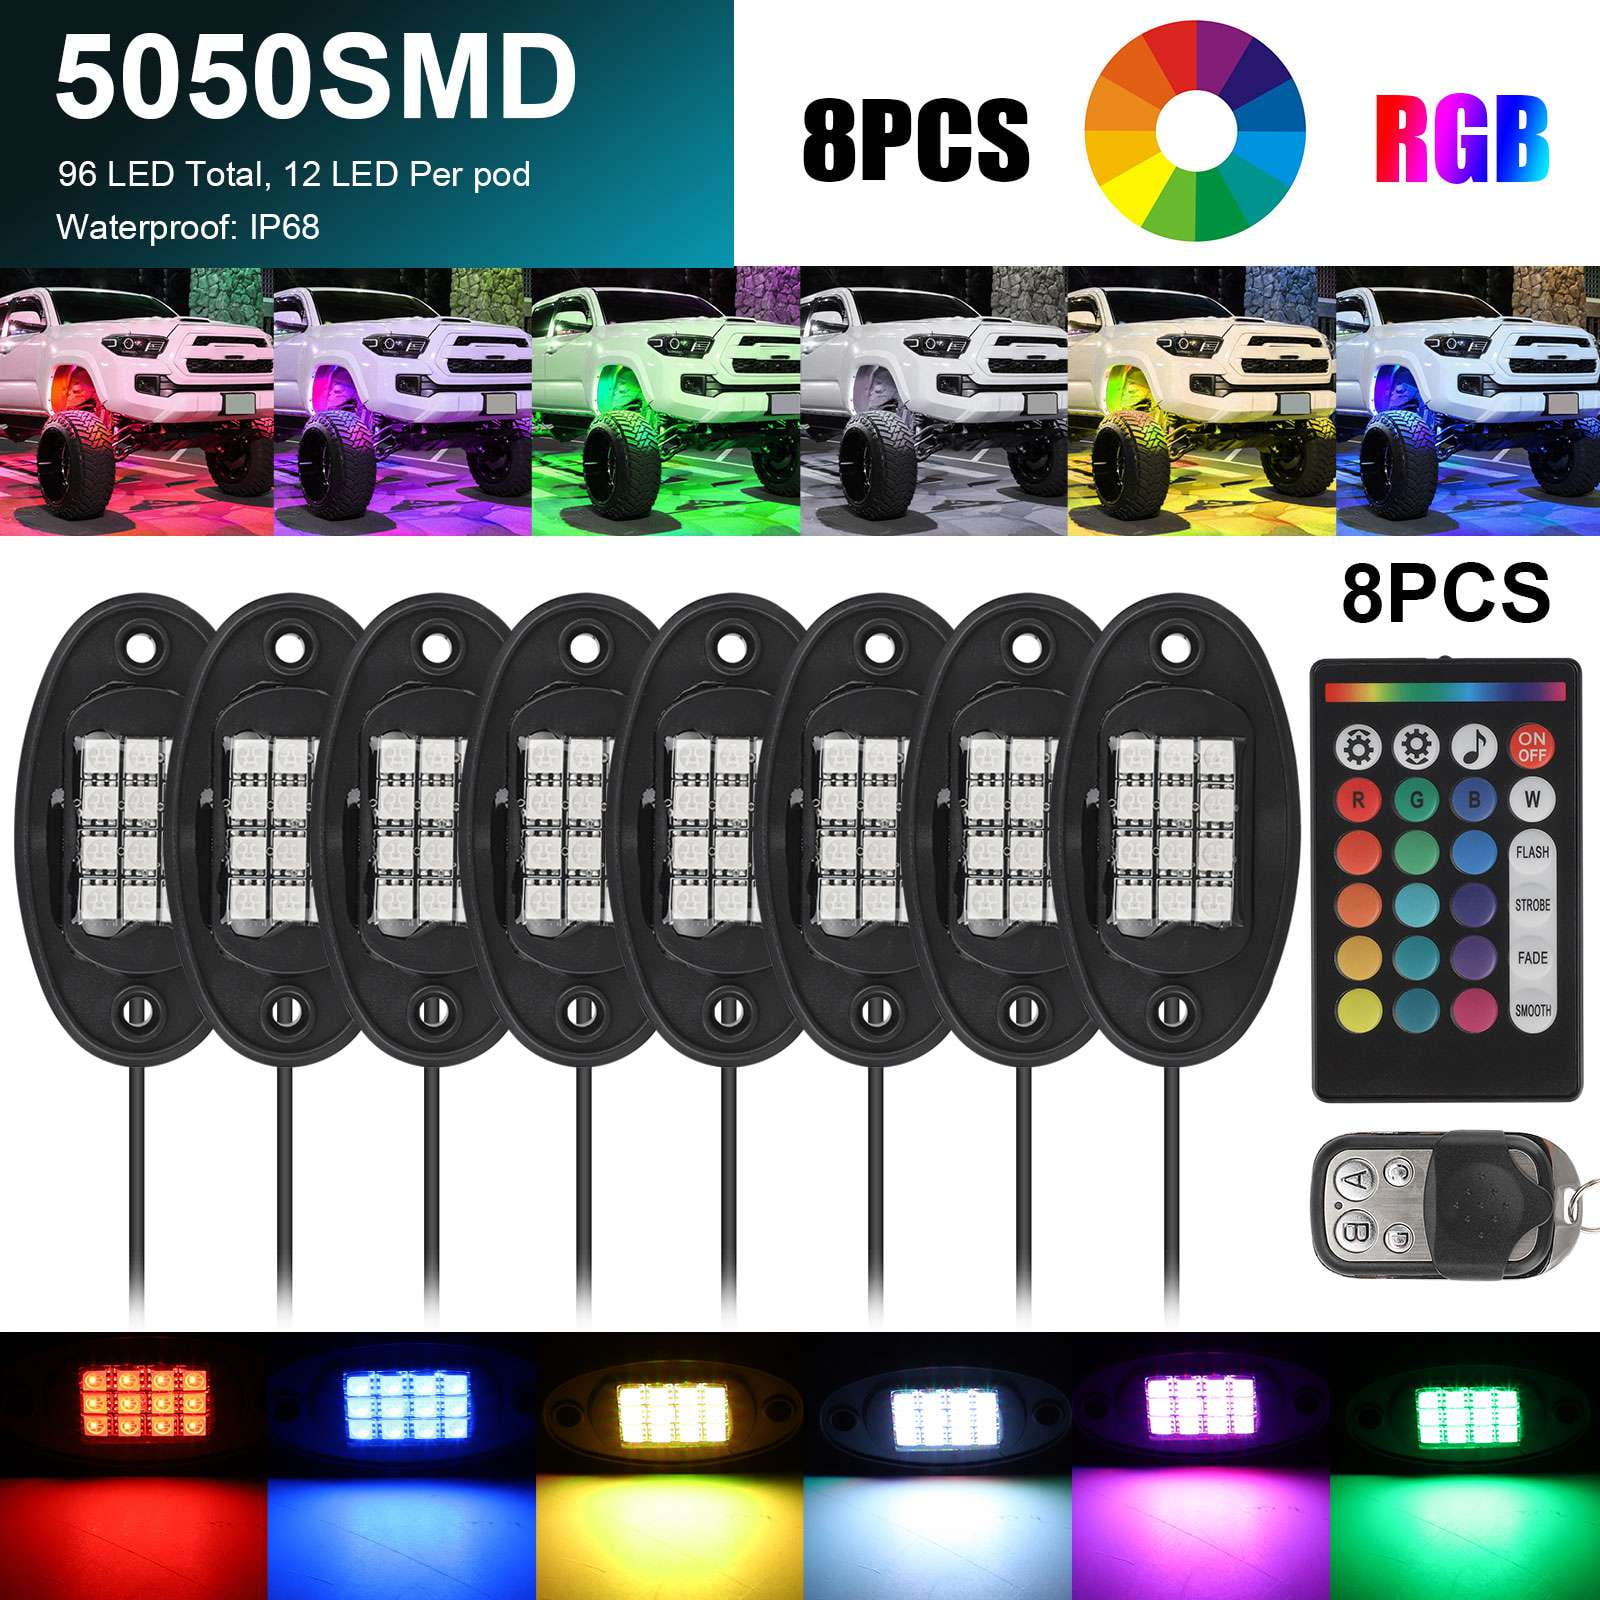 RGBIC Car Underglow Lights with 64 Scene Modes 8 Pods Warm White Car Lights with IP67 Waterproof and Reactive Music Mode for Cars Govee Rock Lights with Smart APP Control DC 12V Trucks 